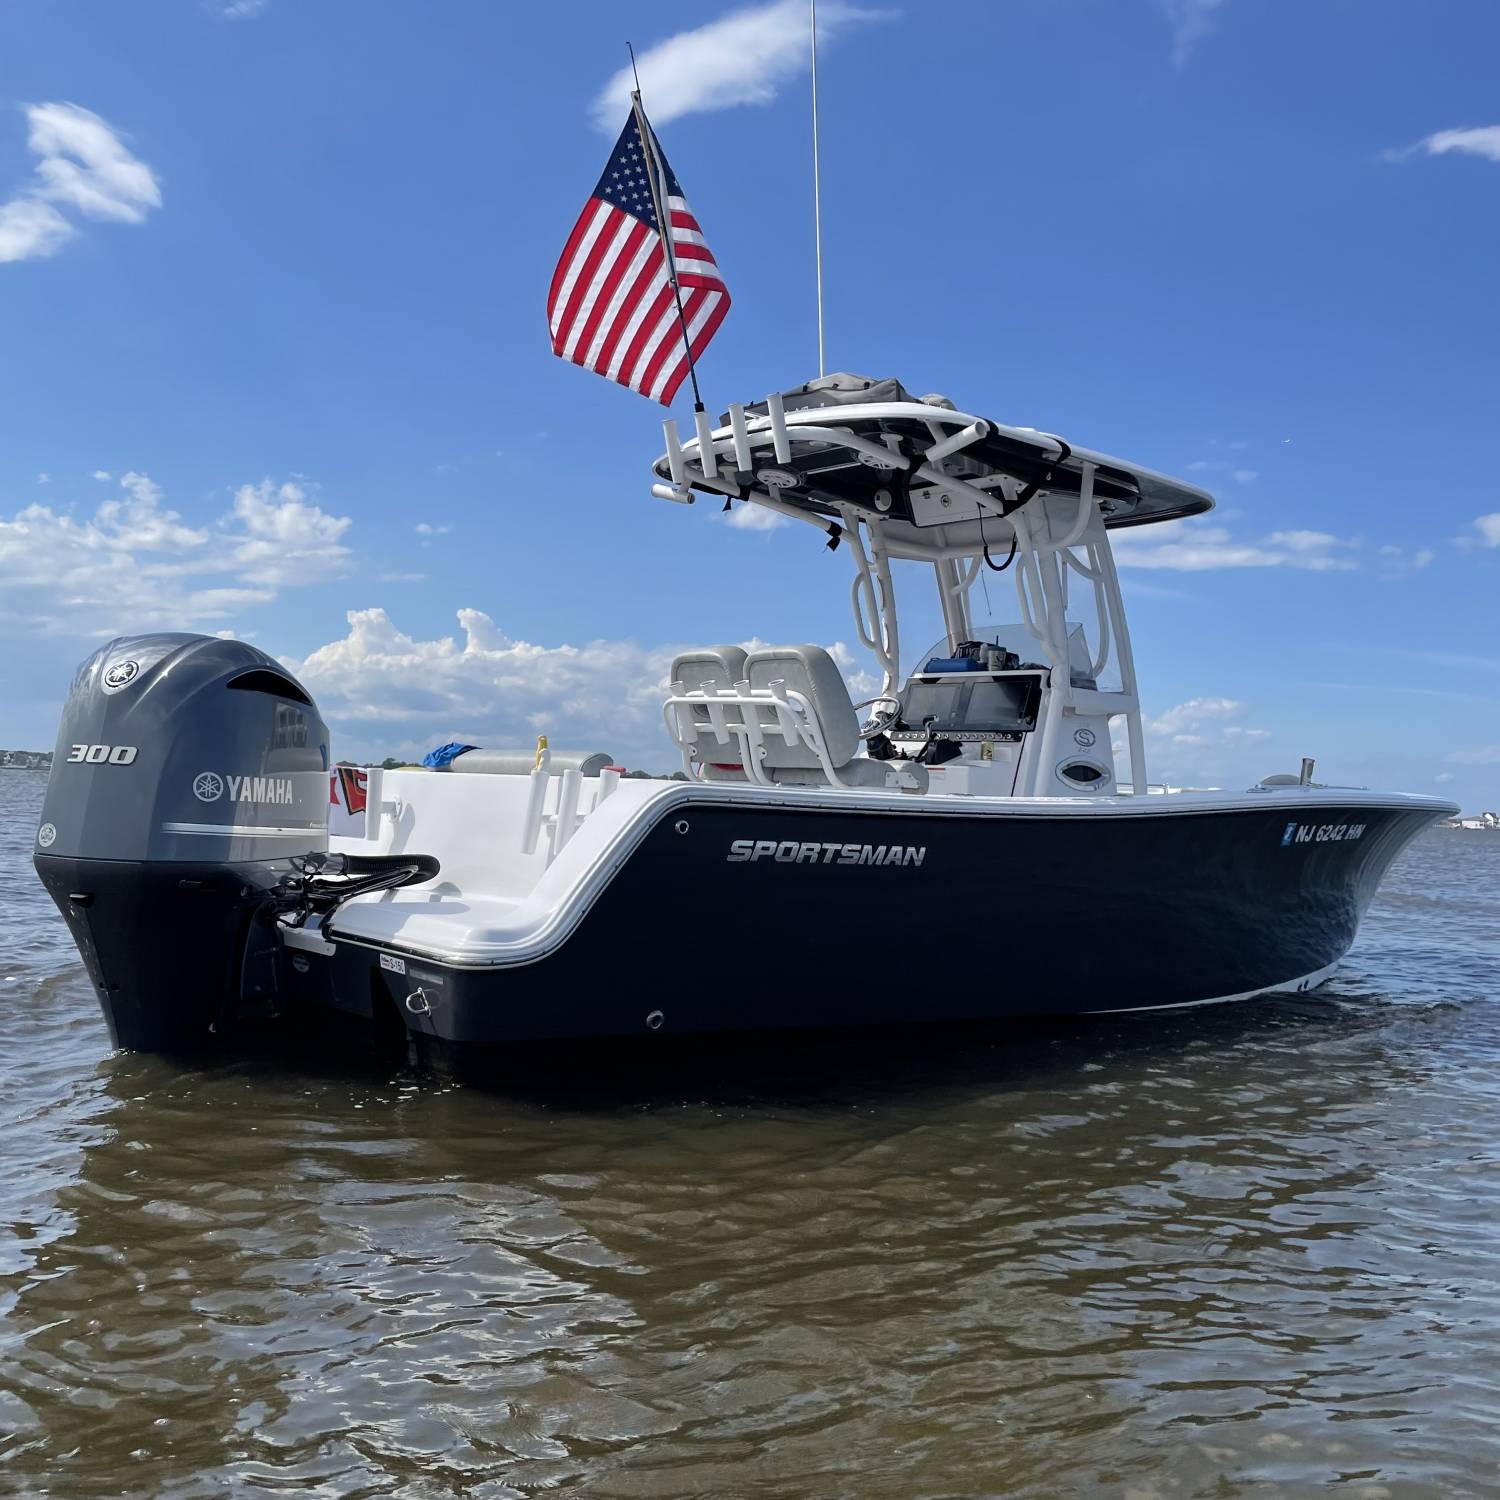 Title: Bay Day - On board their Sportsman Open 242 Center Console - Location: Brick, NJ. Participating in the Photo Contest #SportsmanJune2023